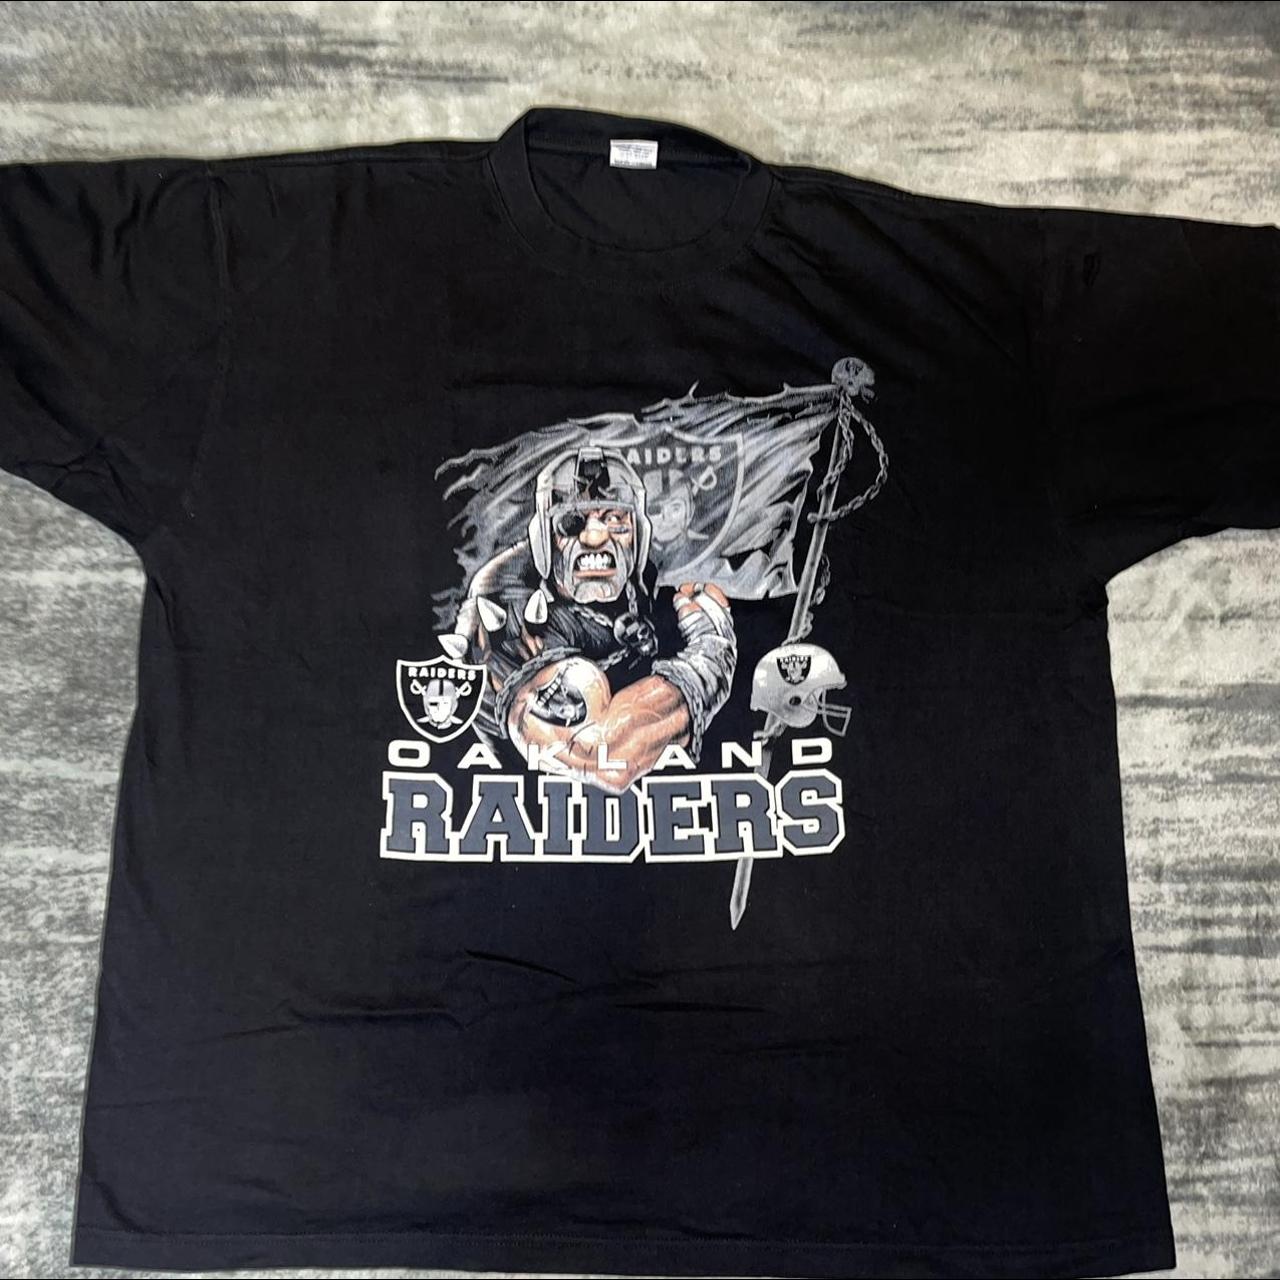 OLD RAIDERS TSHIRT SIZE 3XL SMALL HOLE IN BACK OF - Depop